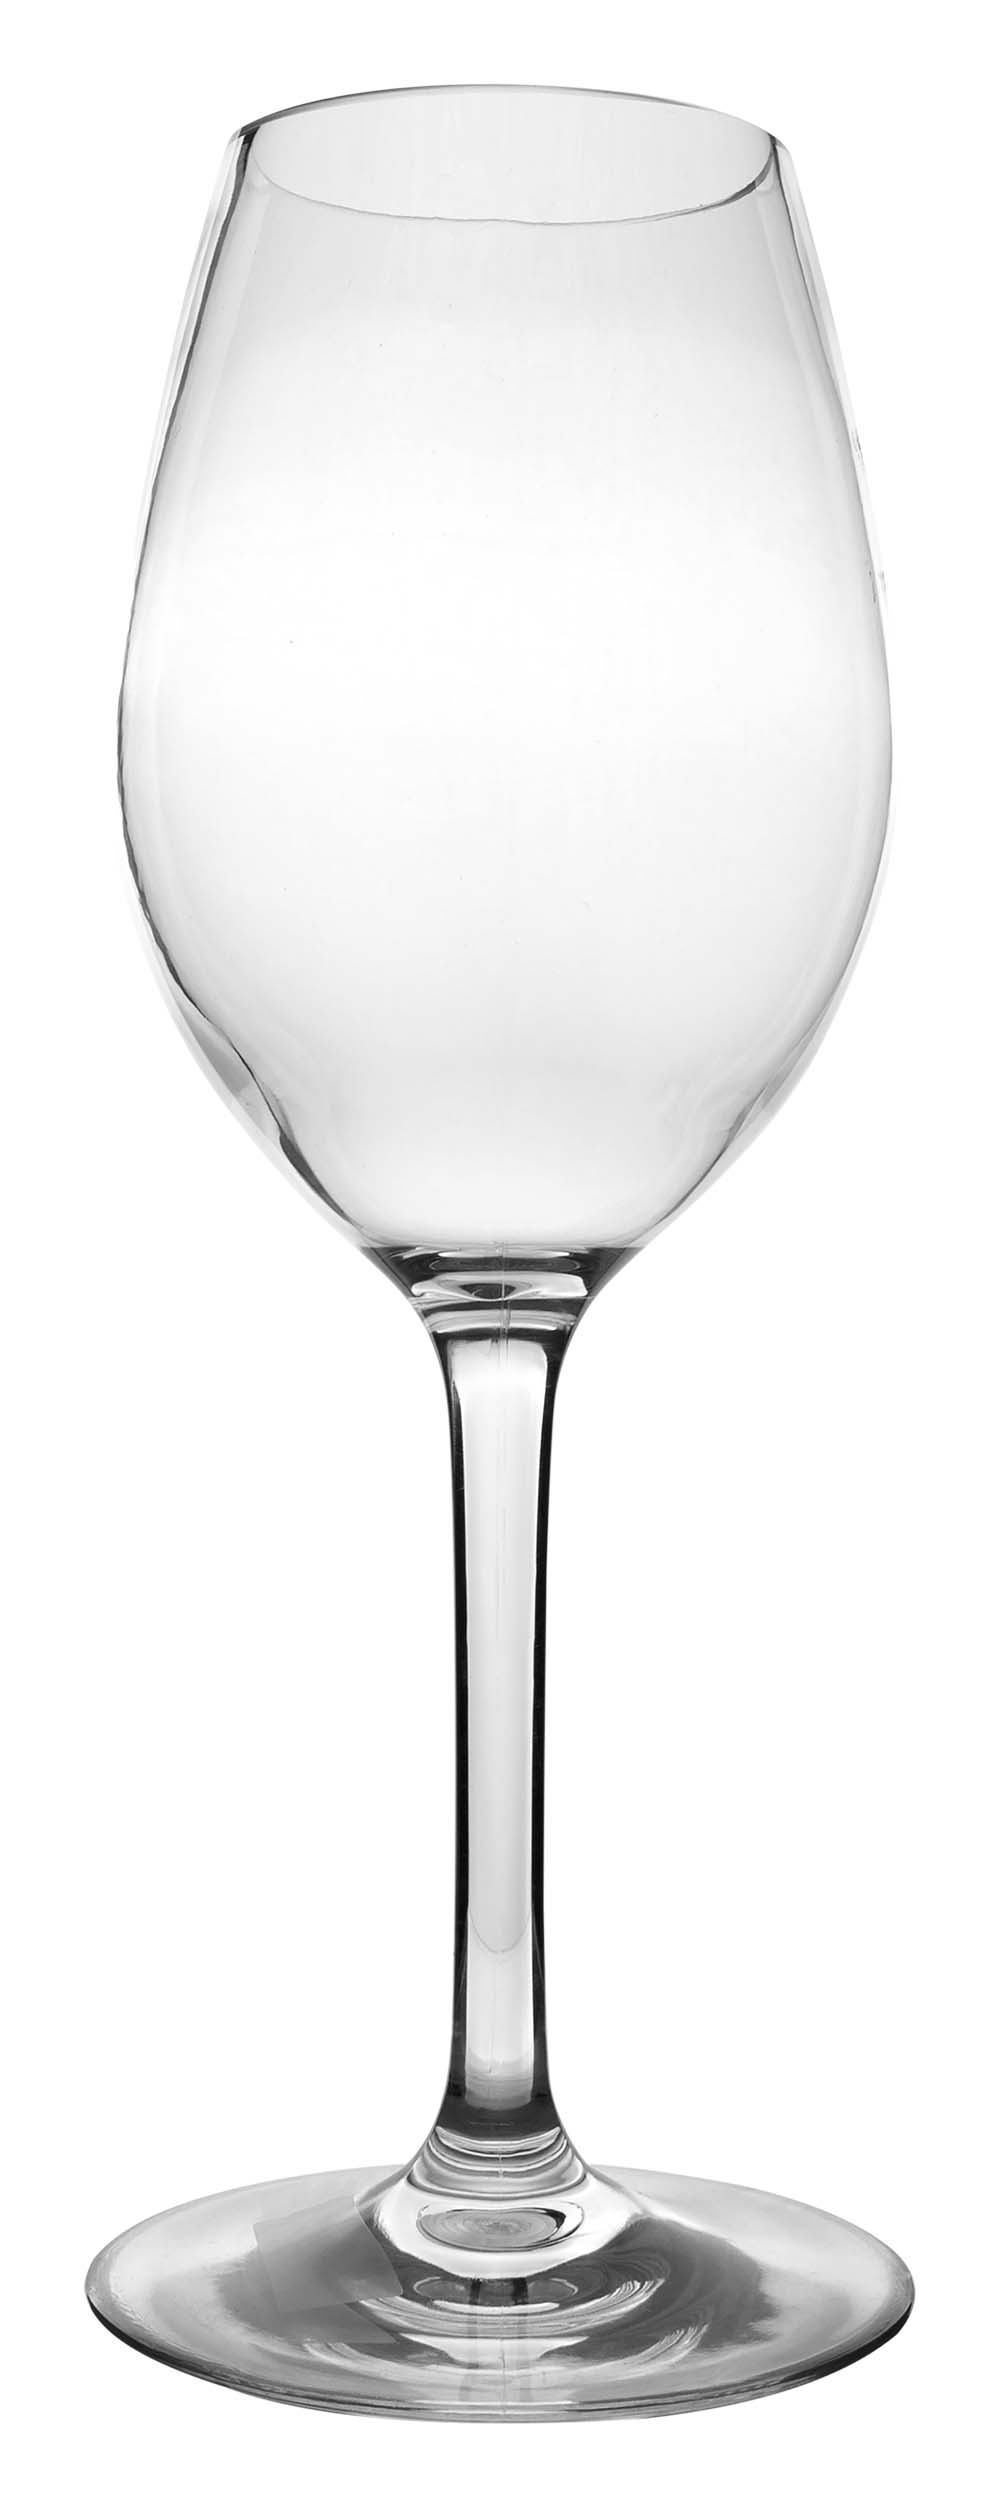 6101460 An extra sturdy and luxurious set of white wine glasses. Made of 100% tritan This makes the glasses almost unbreakable, light weight and scratch proof. This glass is also dishwasher safe. The glass is BPA free.